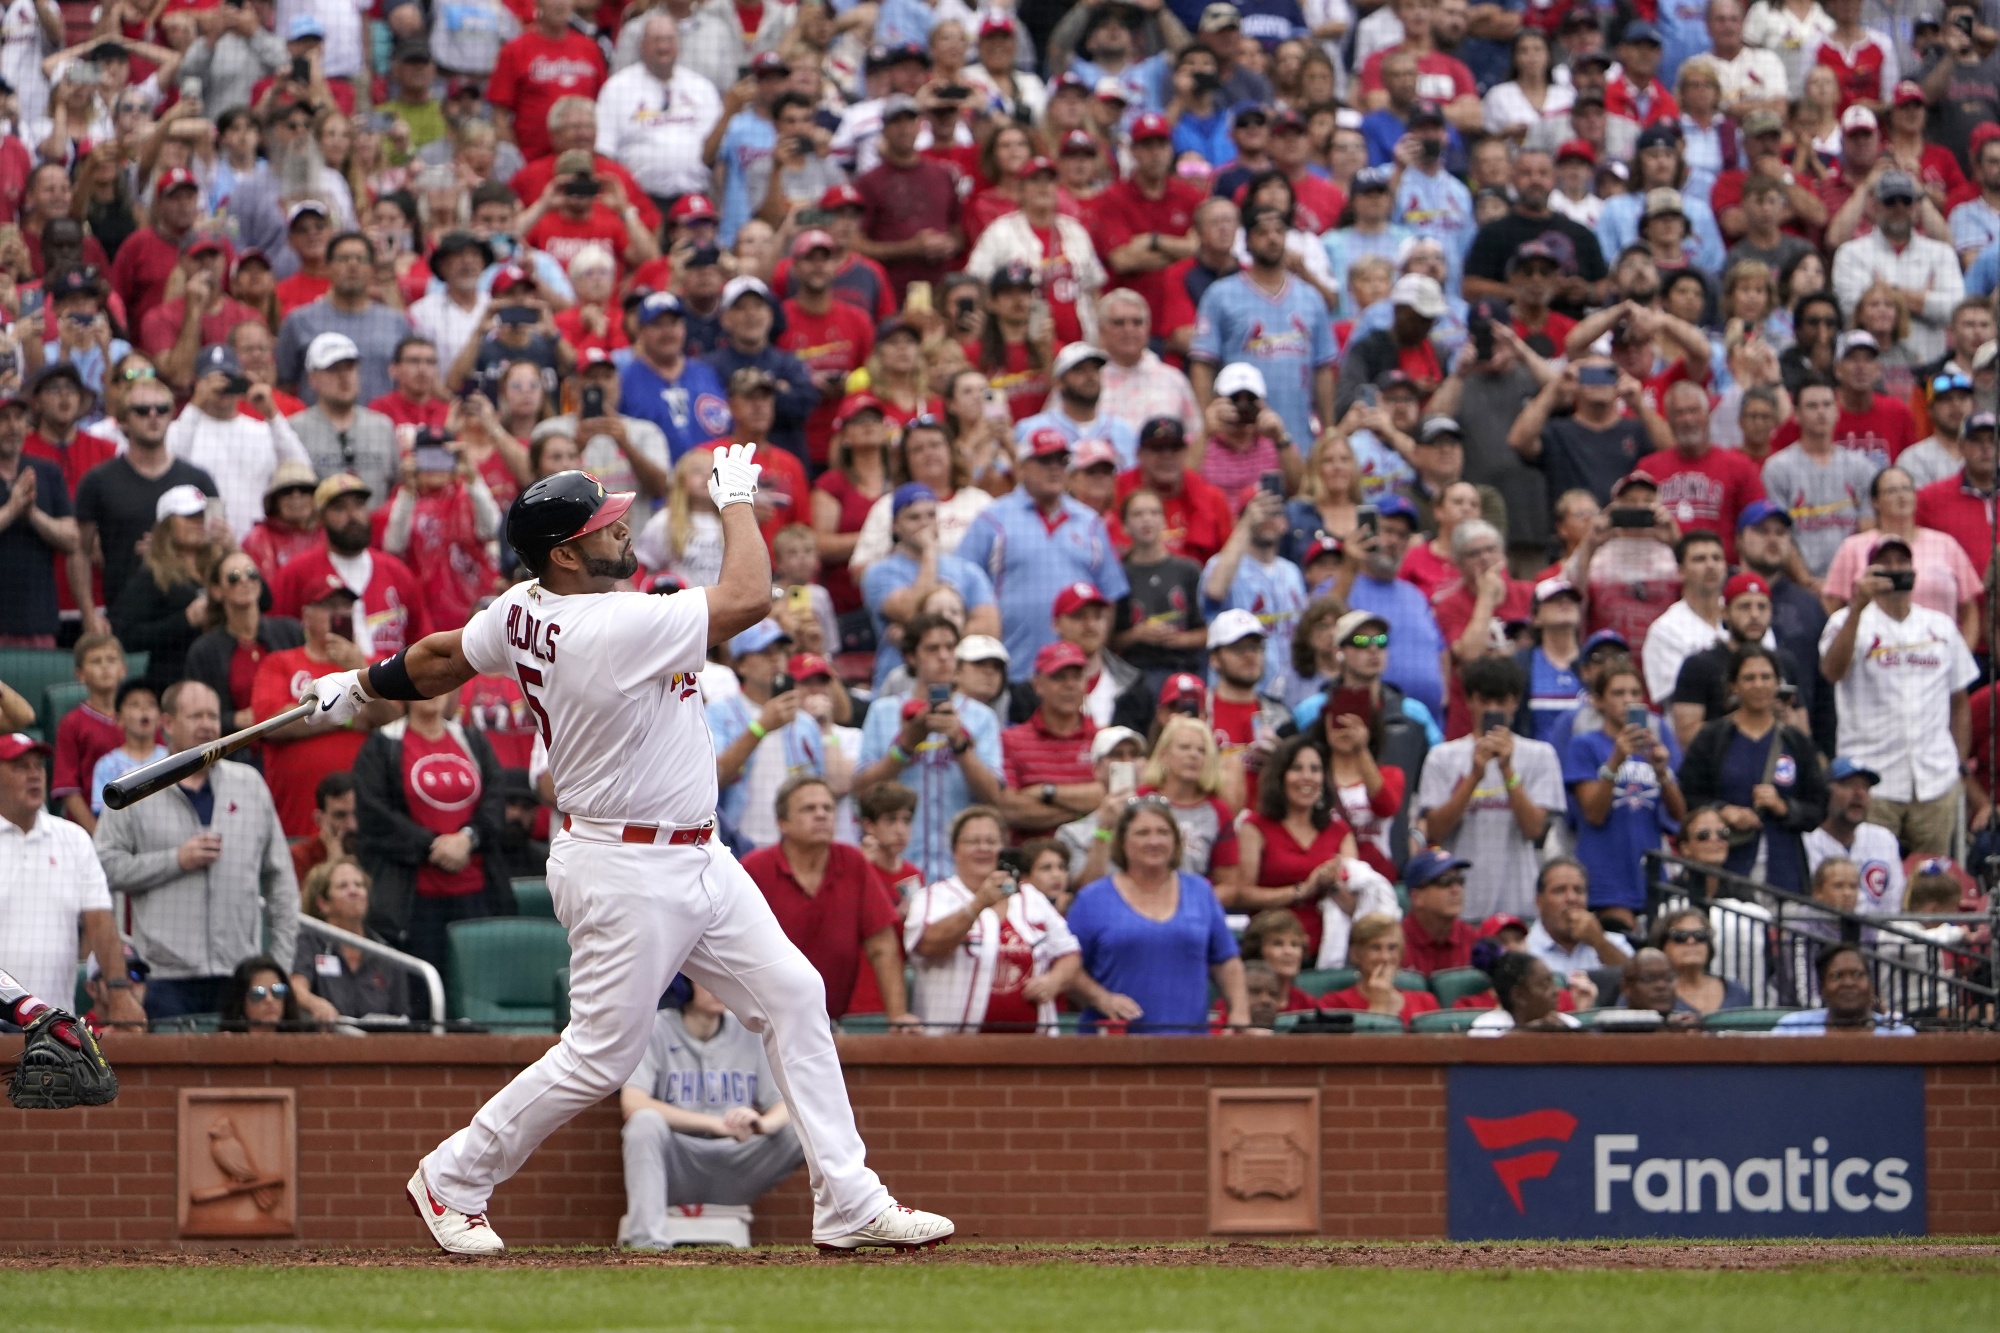 Pujols Chasing Home Run History as Cardinals Chase Playoffs - Bloomberg